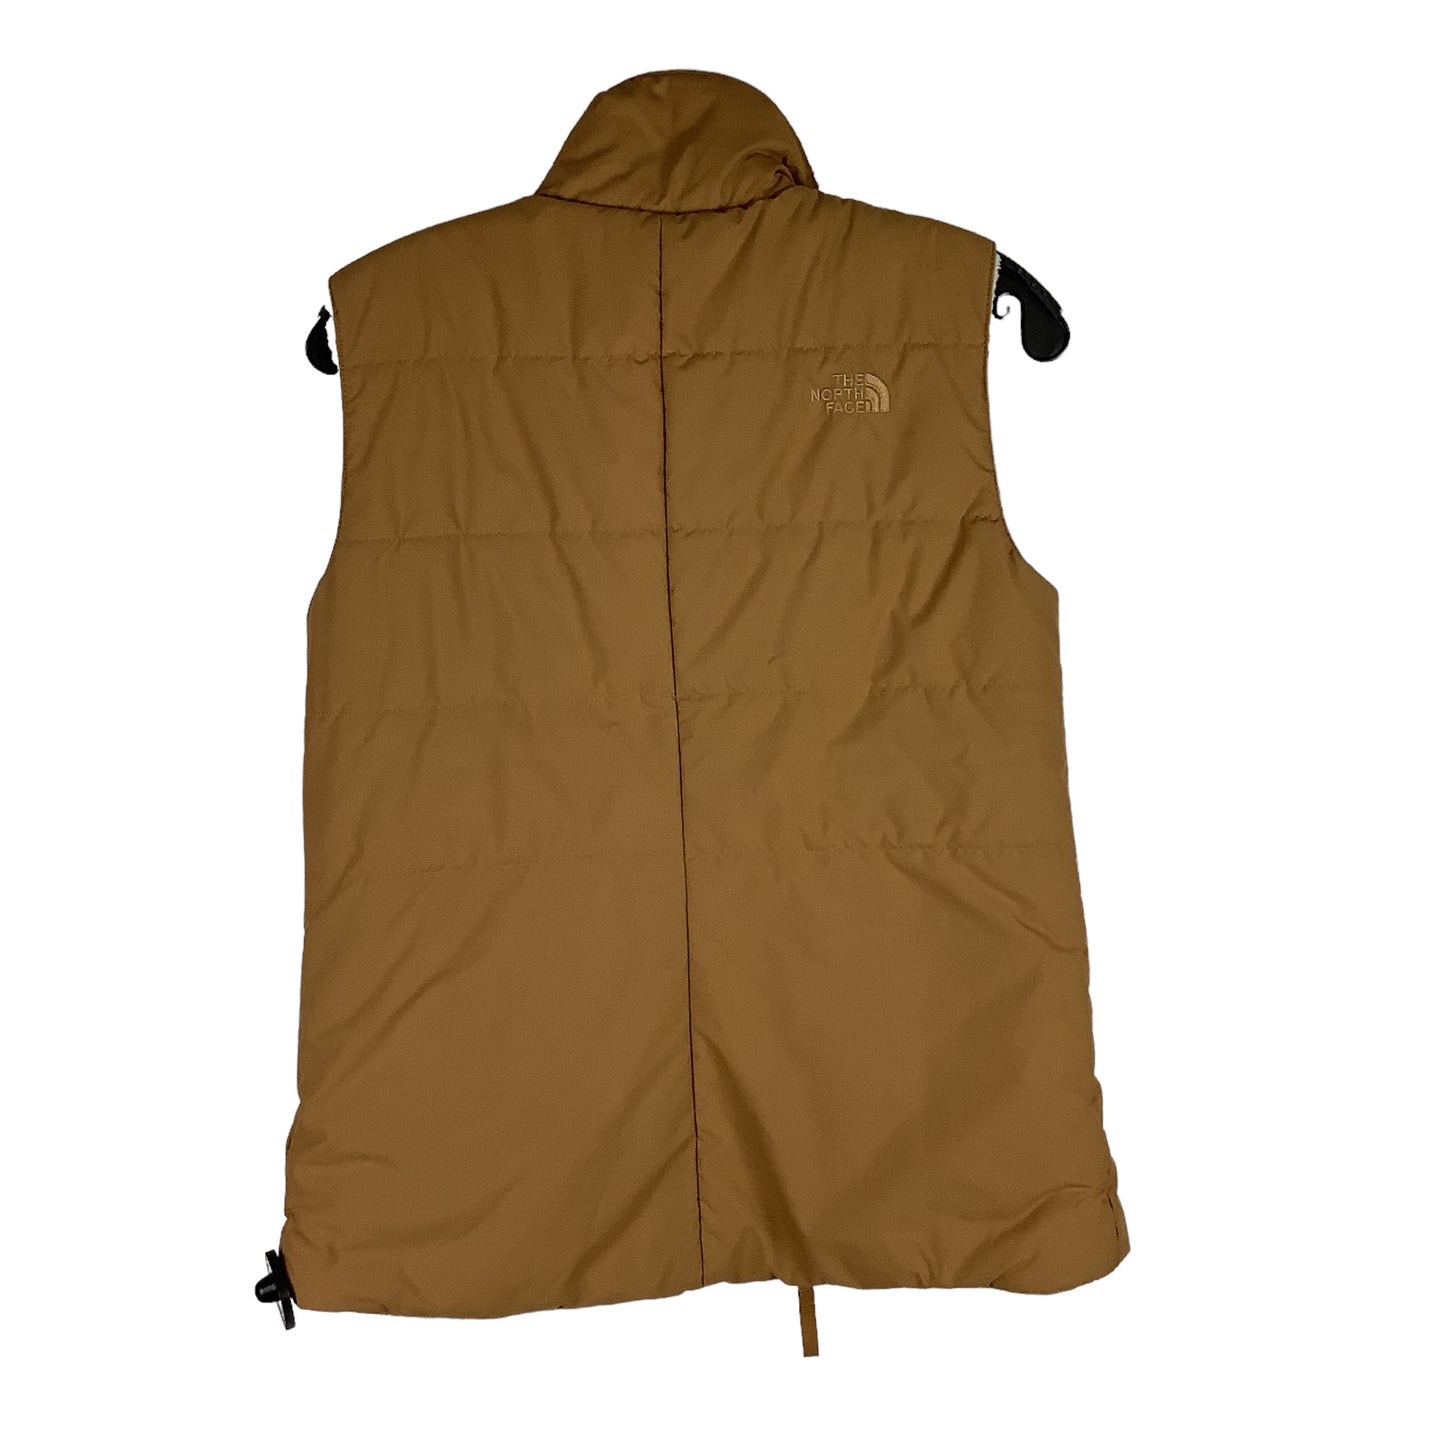 Vest Designer By The North Face  Size: Xs